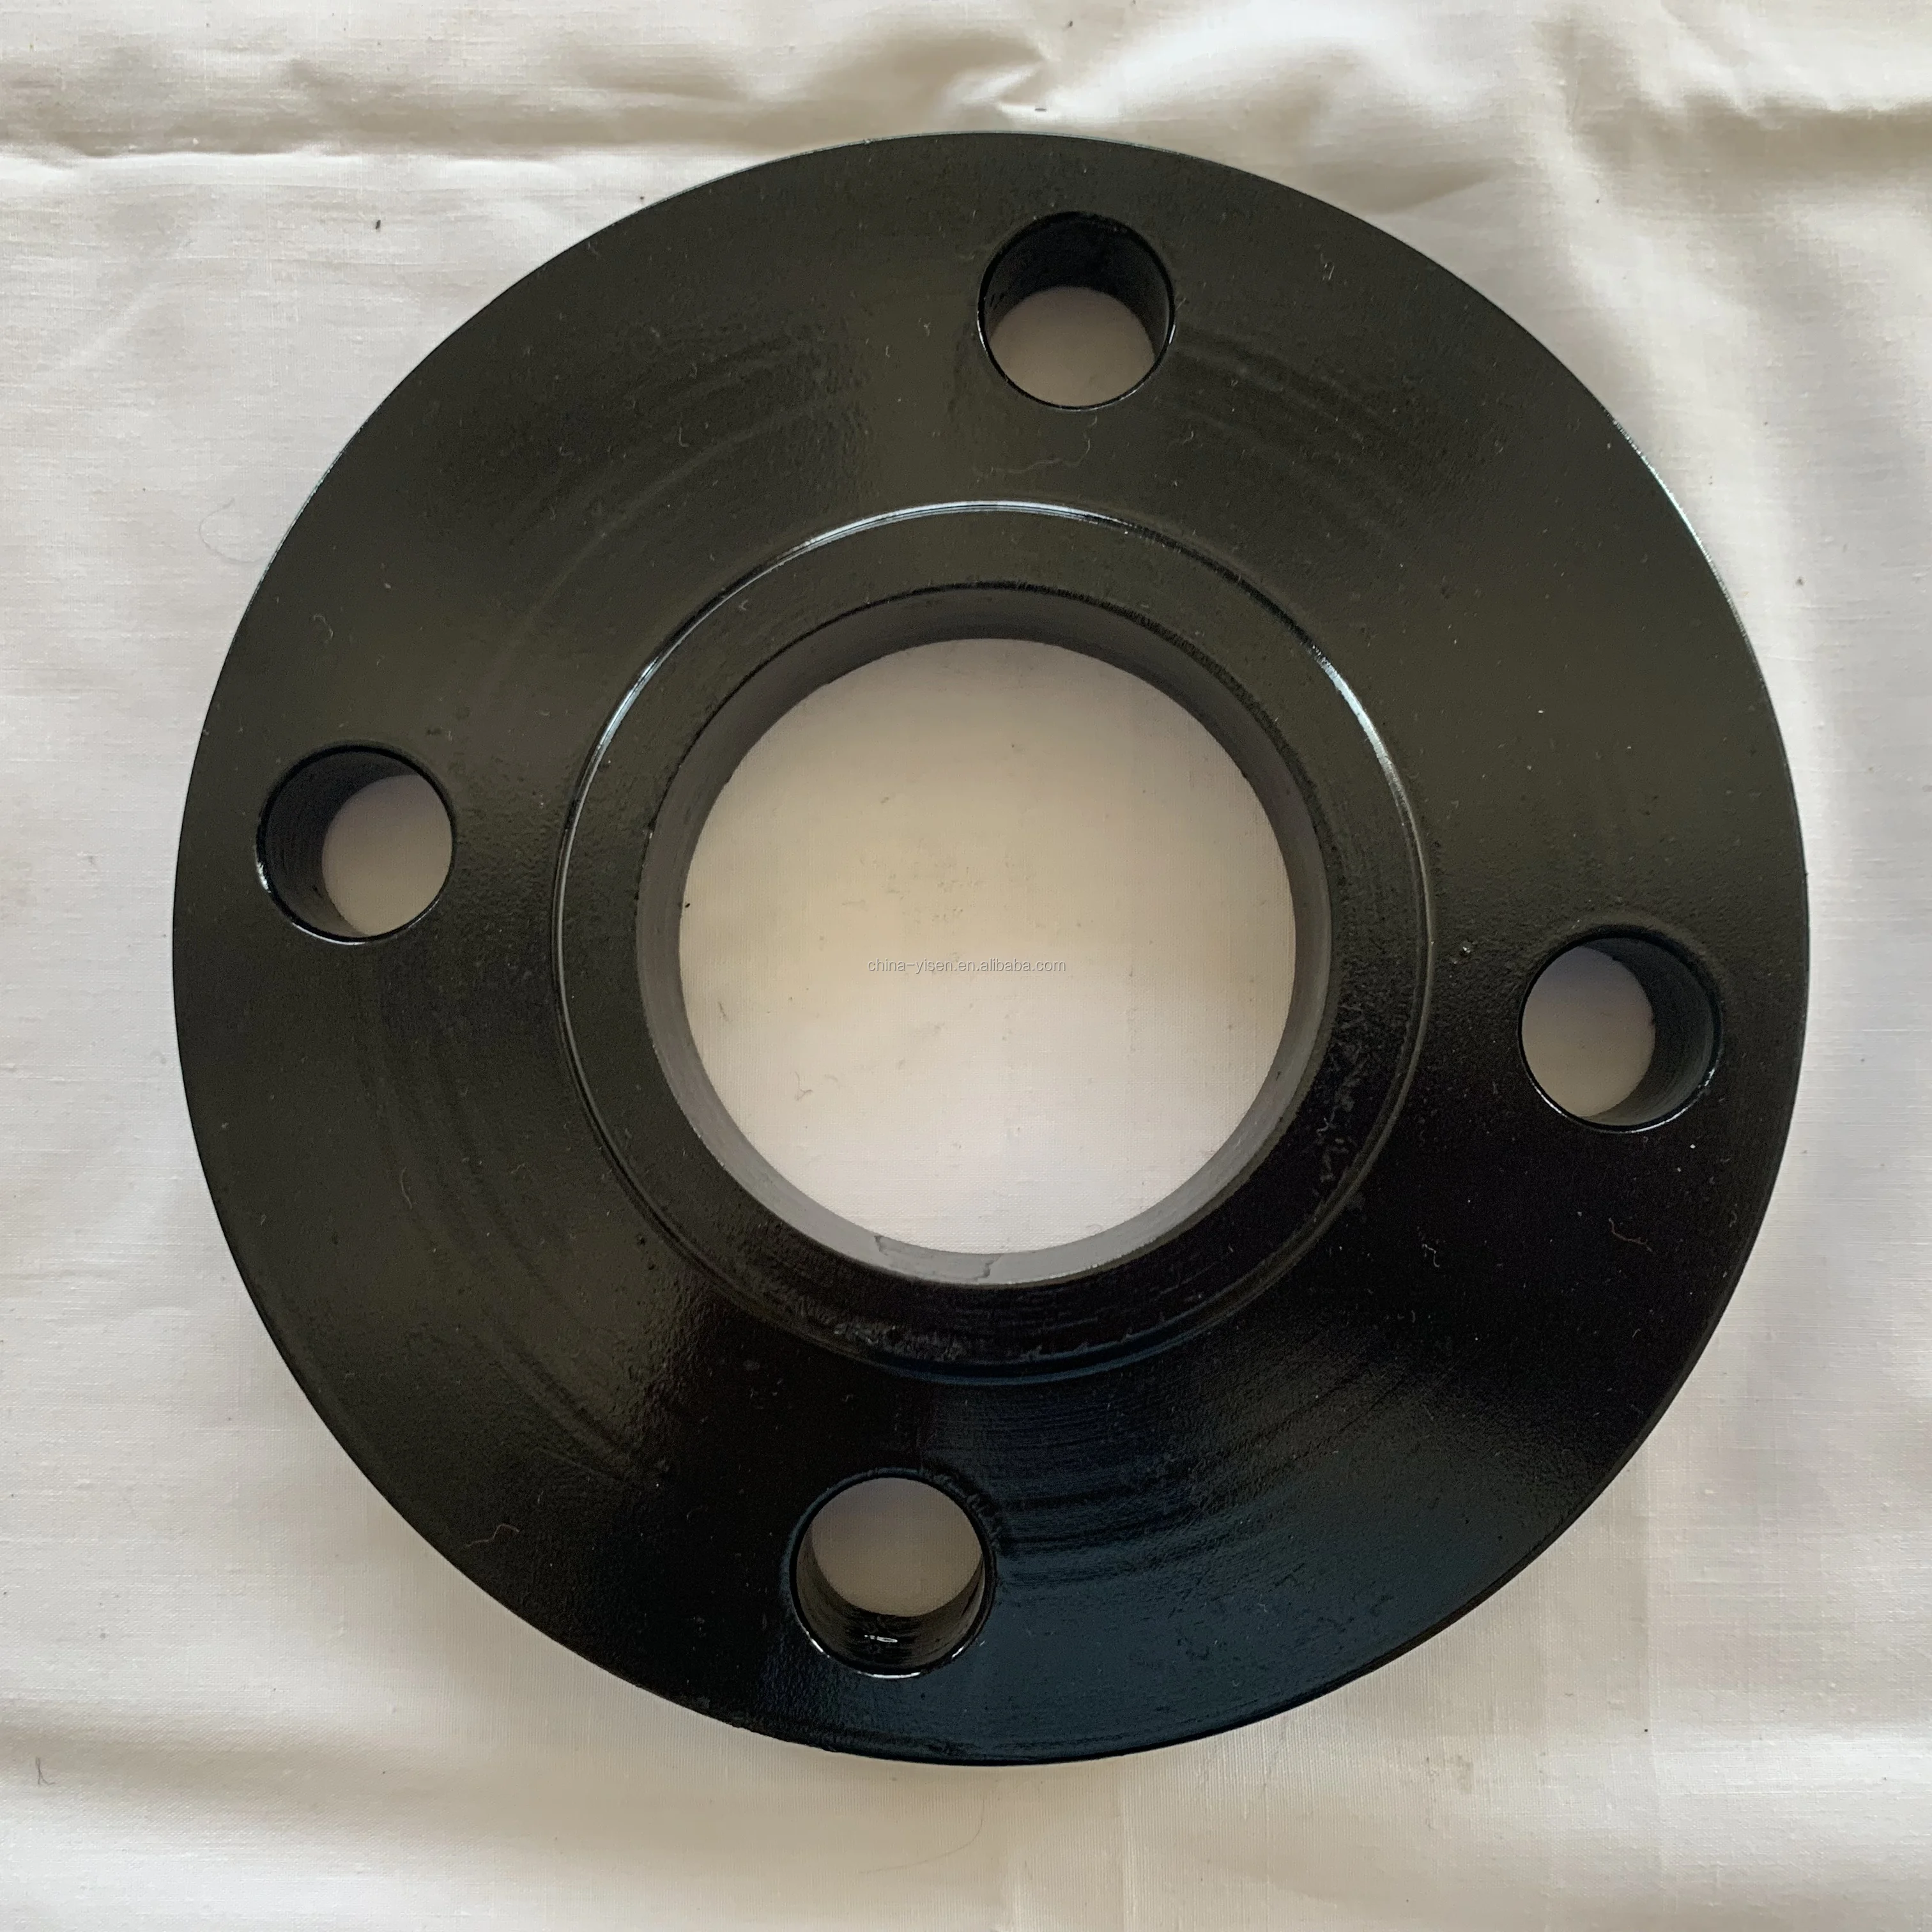 Ansi B165 Cl600 Forged Flanges Stainless Steel Aisi 316316l Slip On Flanges Buy Stainless 9792